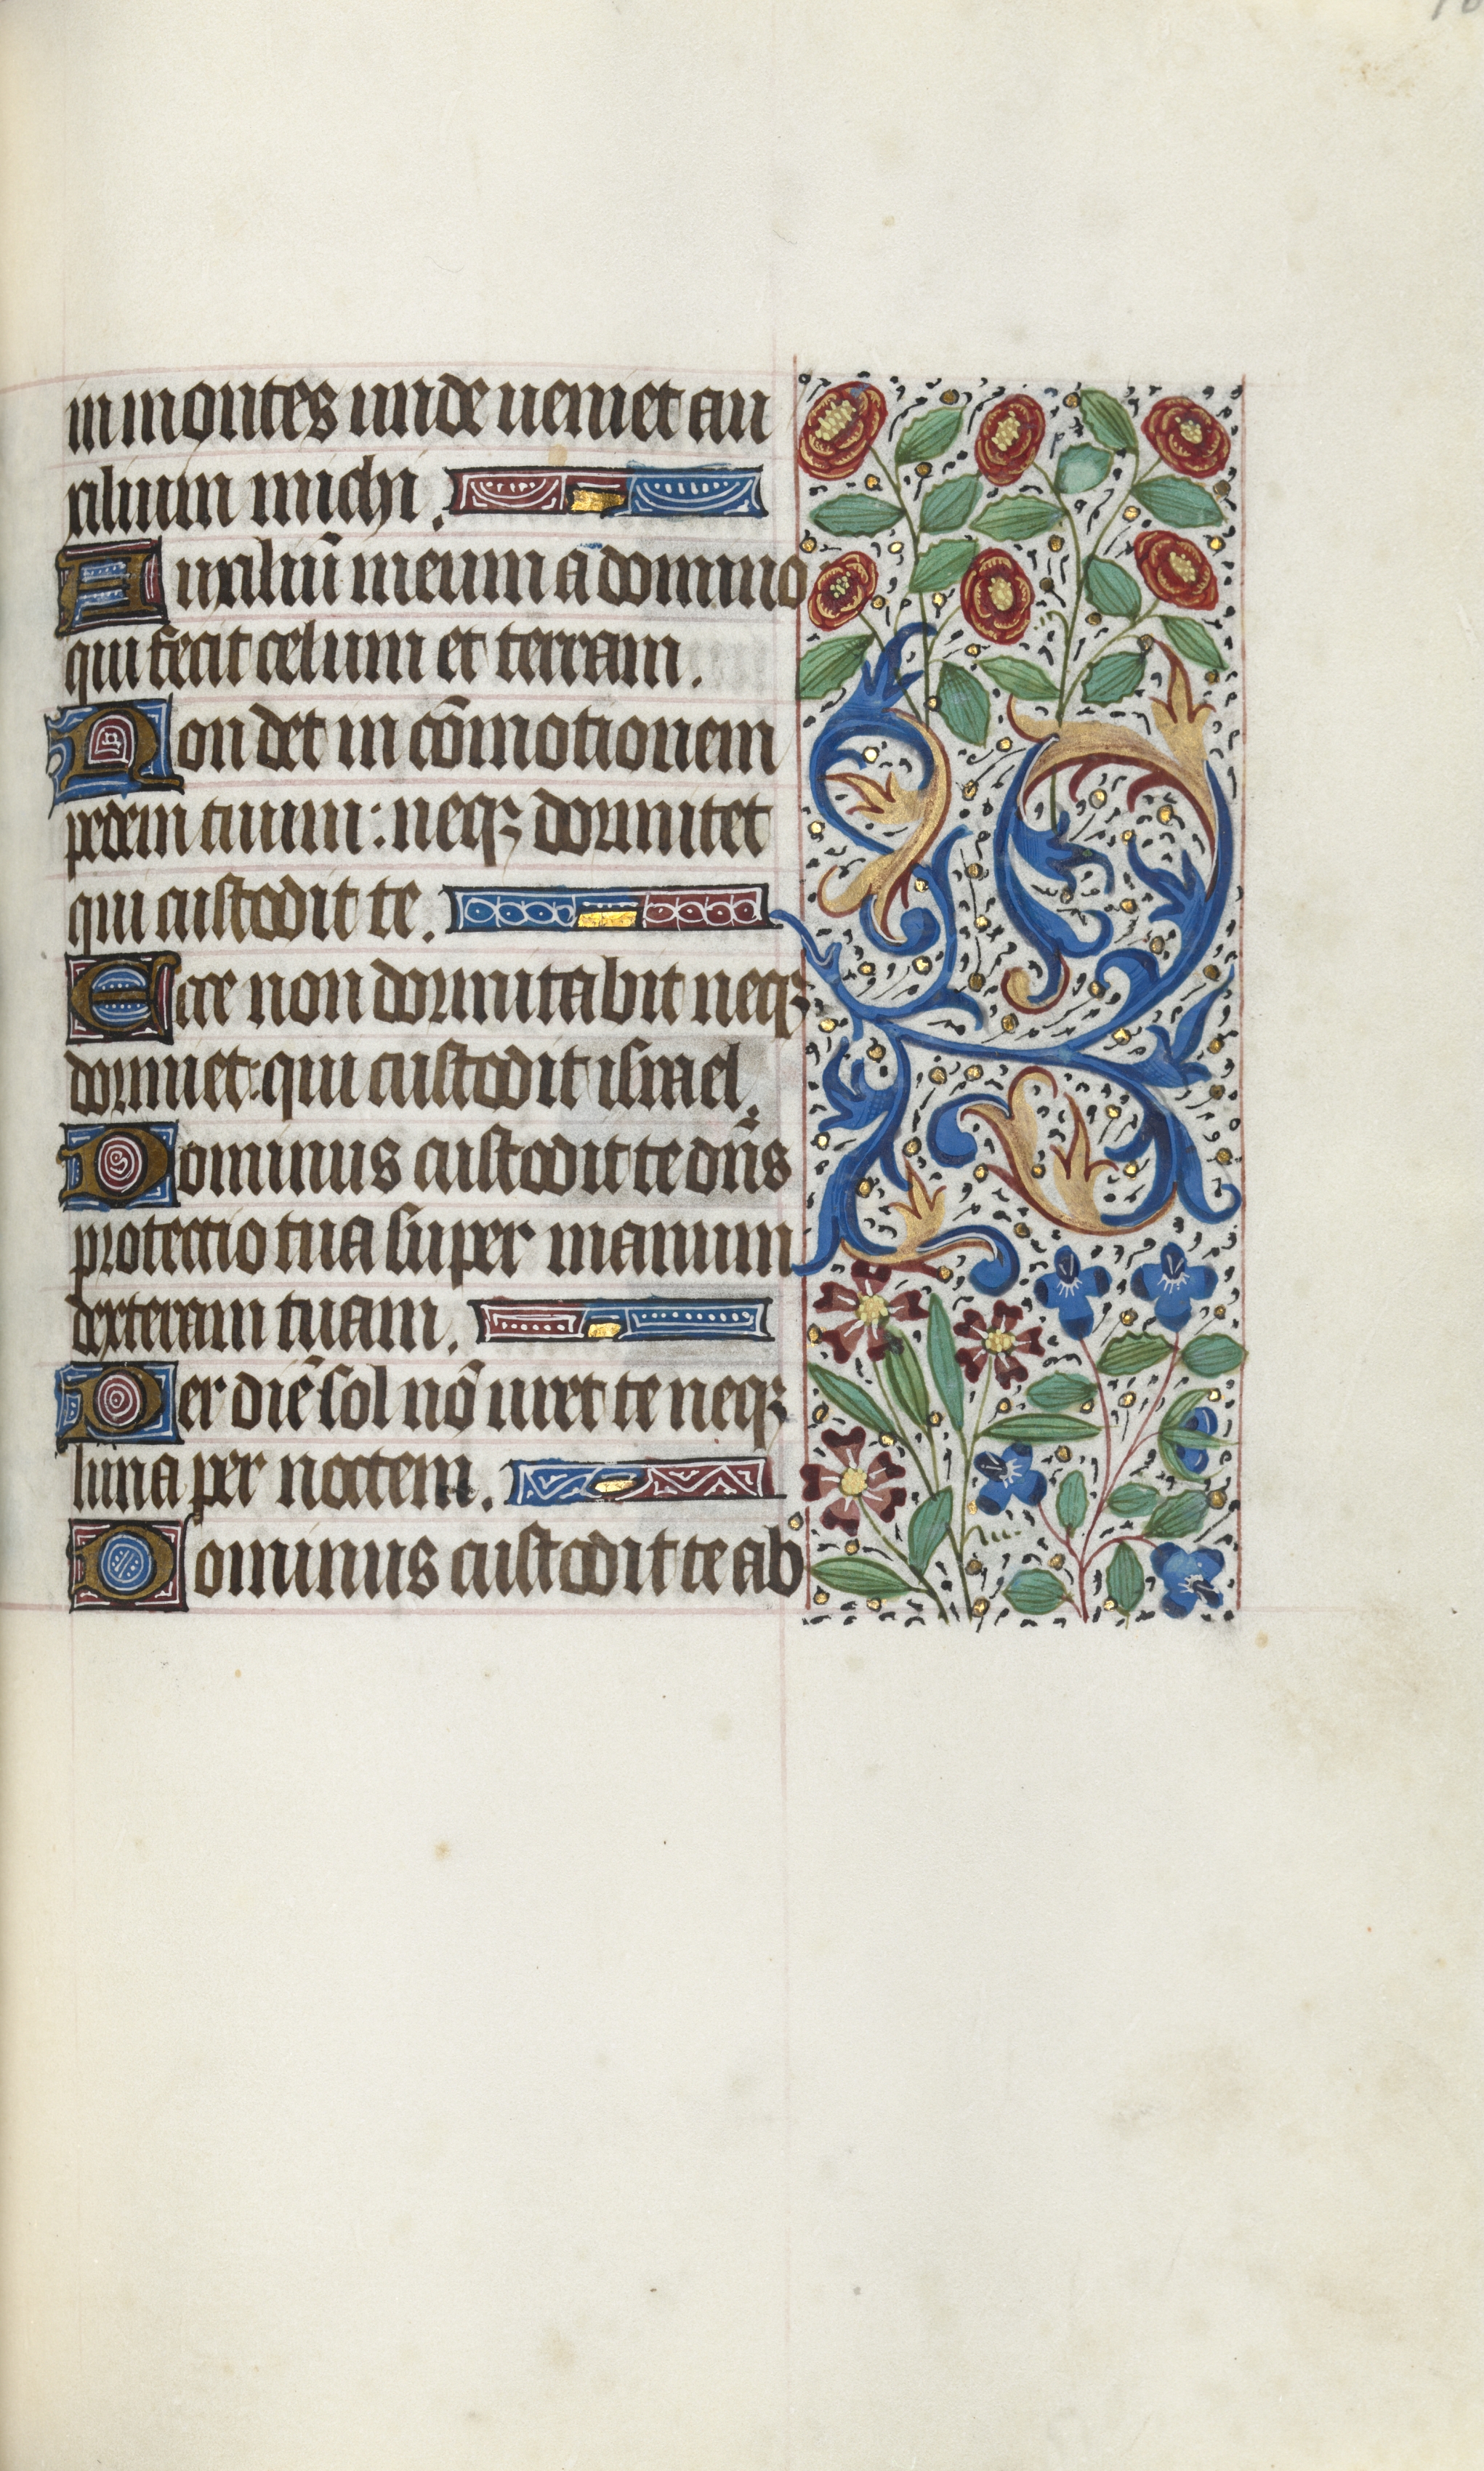 Book of Hours (Use of Rouen): fol. 105r